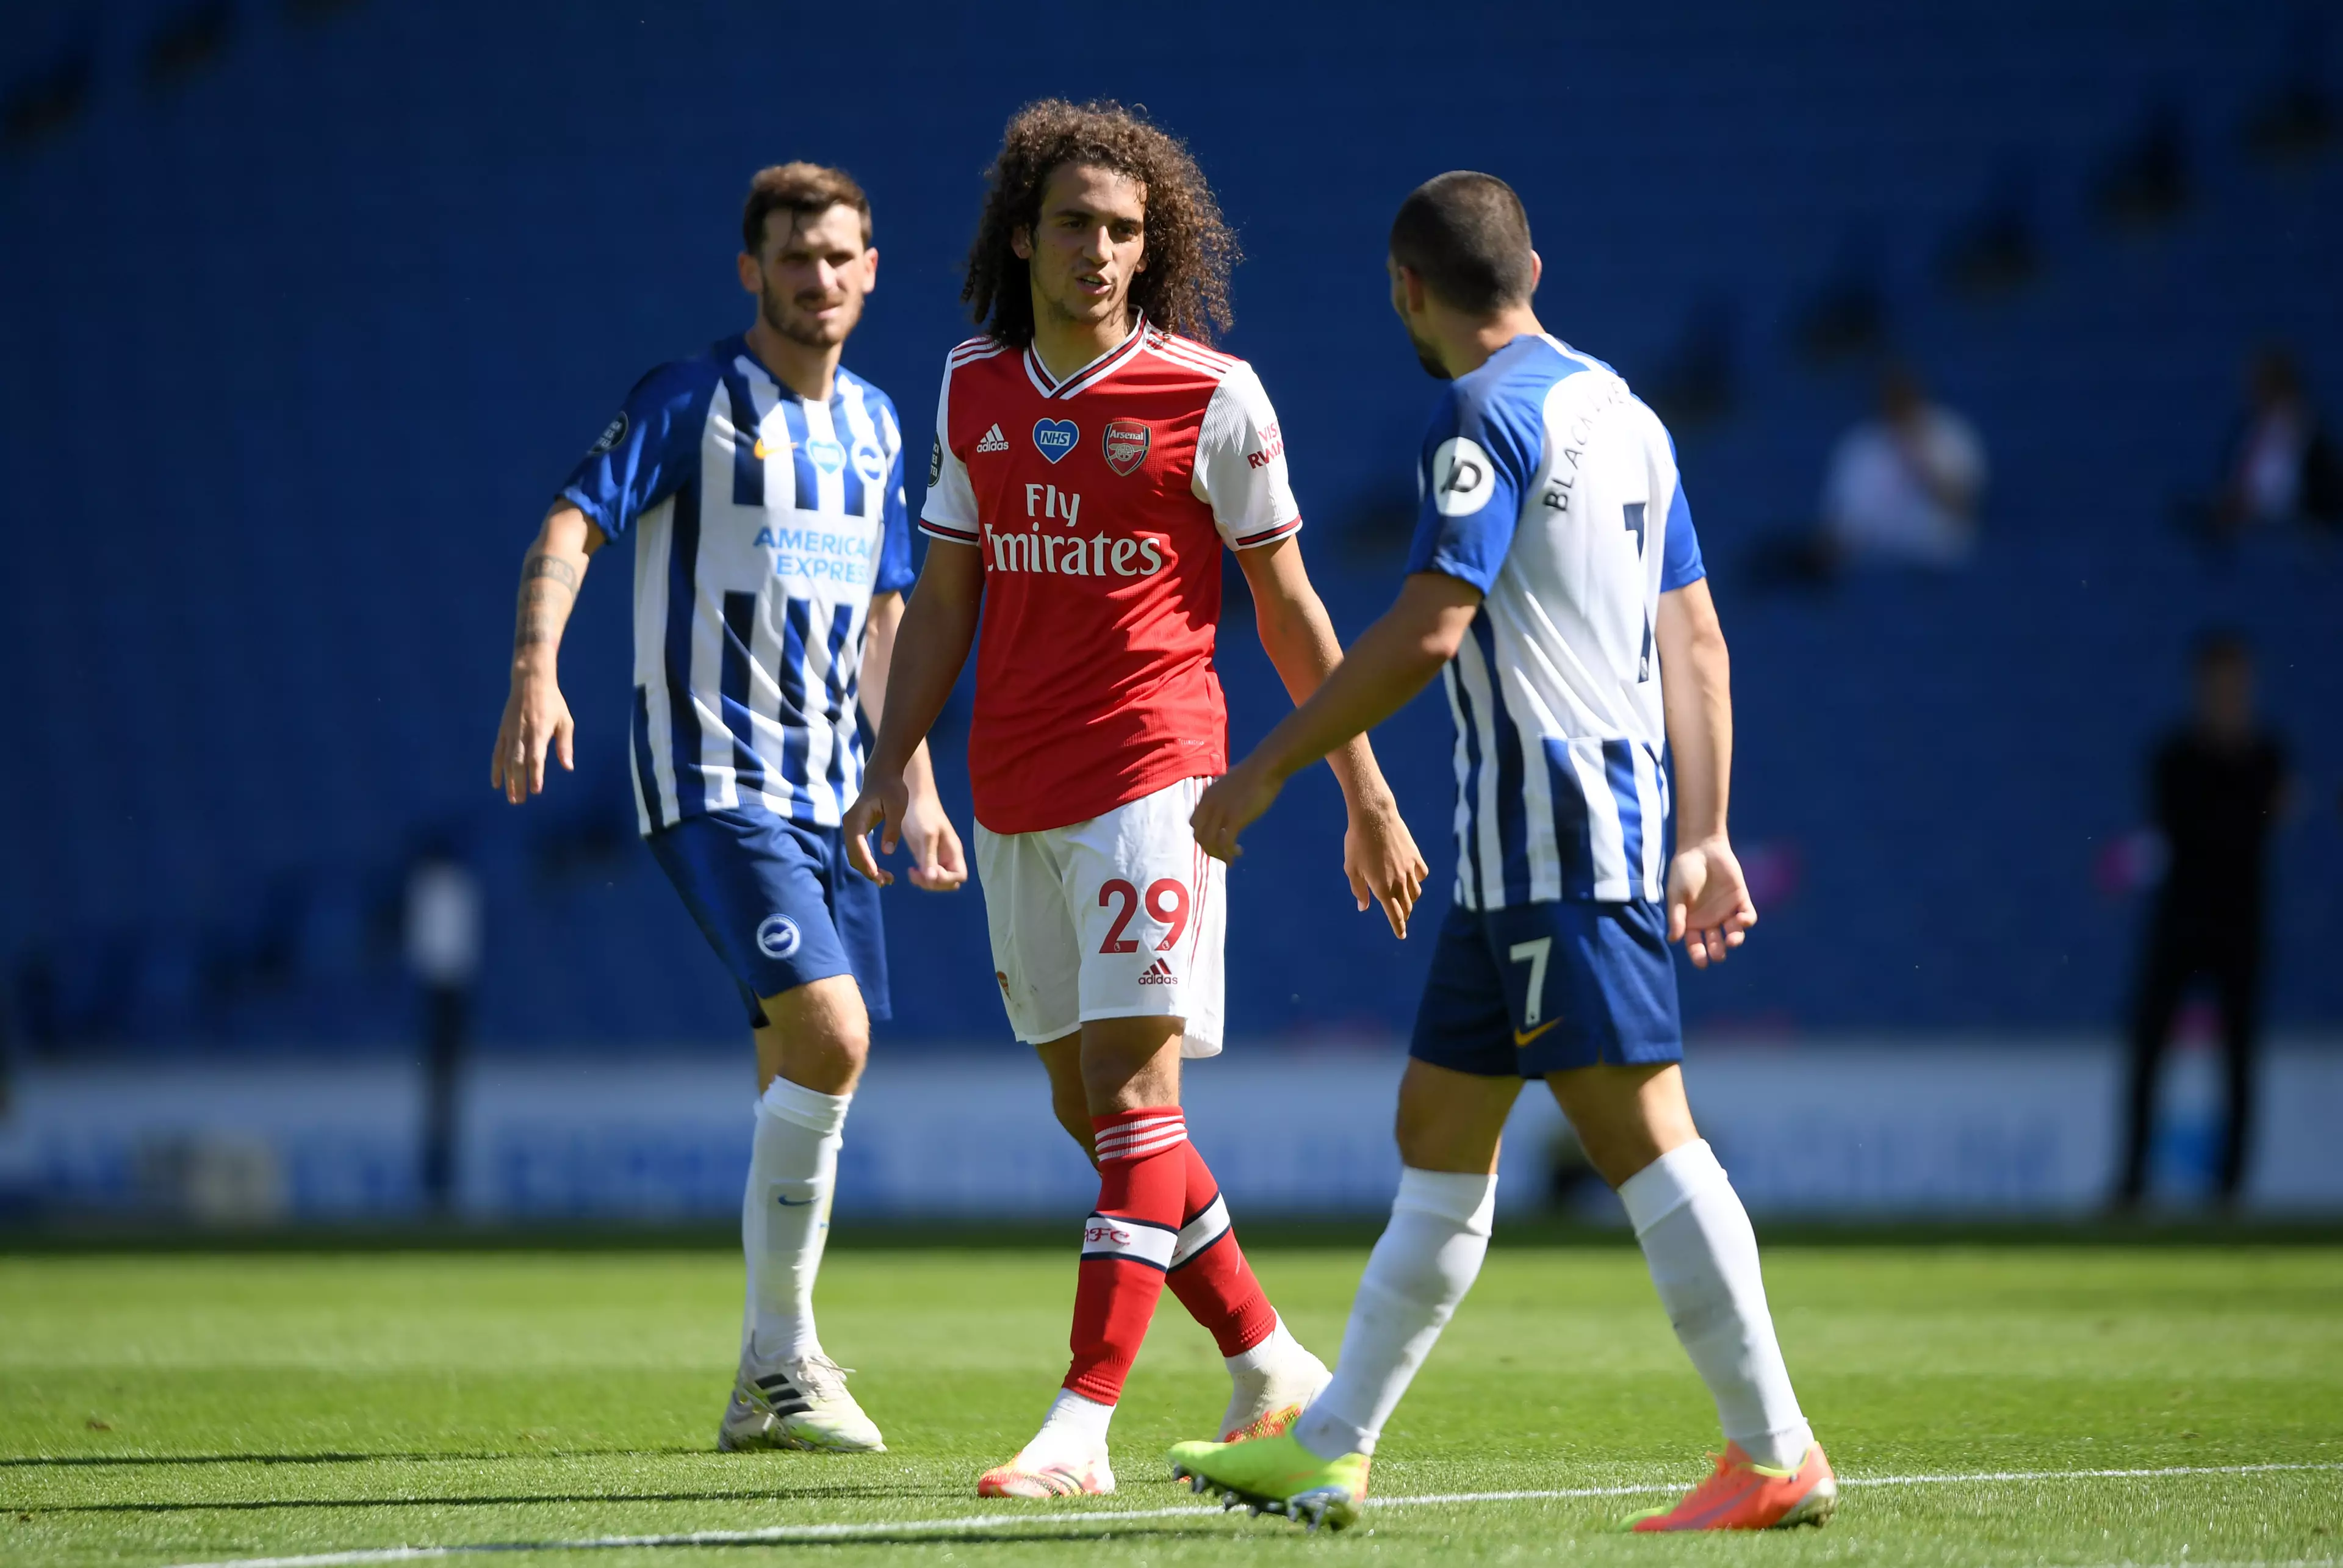 Guendouzi's most recent game saw a spat with Neal Maupay. Image: PA Images